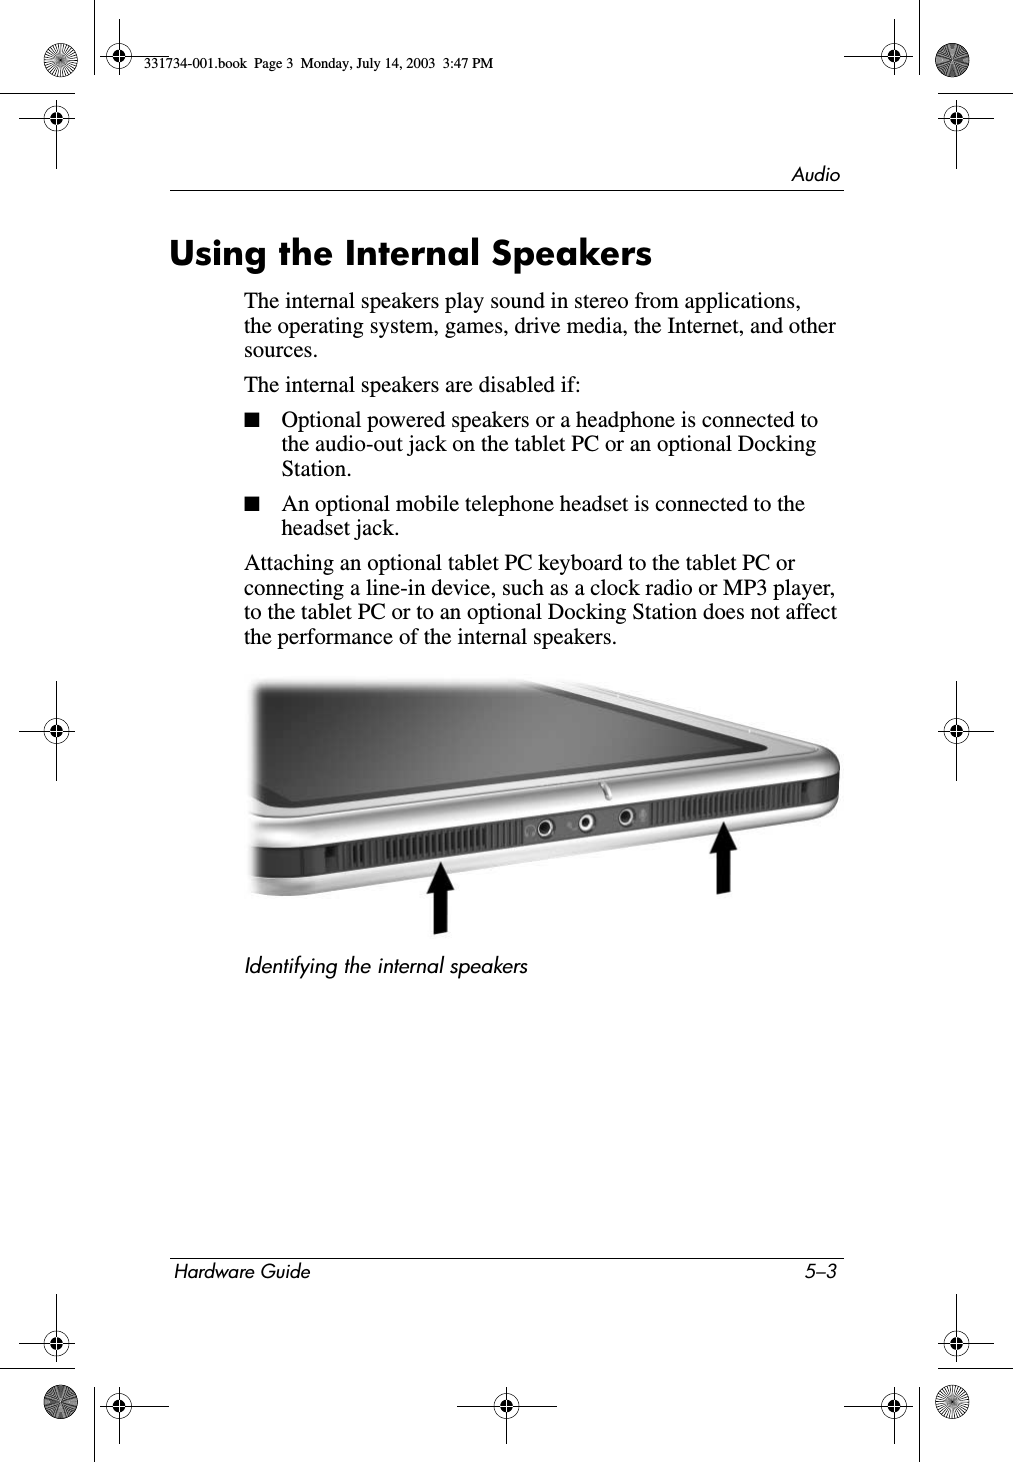 AudioHardware Guide 5–3Using the Internal SpeakersThe internal speakers play sound in stereo from applications, the operating system, games, drive media, the Internet, and other sources.The internal speakers are disabled if:■Optional powered speakers or a headphone is connected to the audio-out jack on the tablet PC or an optional Docking Station.■An optional mobile telephone headset is connected to the headset jack.Attaching an optional tablet PC keyboard to the tablet PC or connecting a line-in device, such as a clock radio or MP3 player, to the tablet PC or to an optional Docking Station does not affect the performance of the internal speakers.Identifying the internal speakers331734-001.book  Page 3  Monday, July 14, 2003  3:47 PM